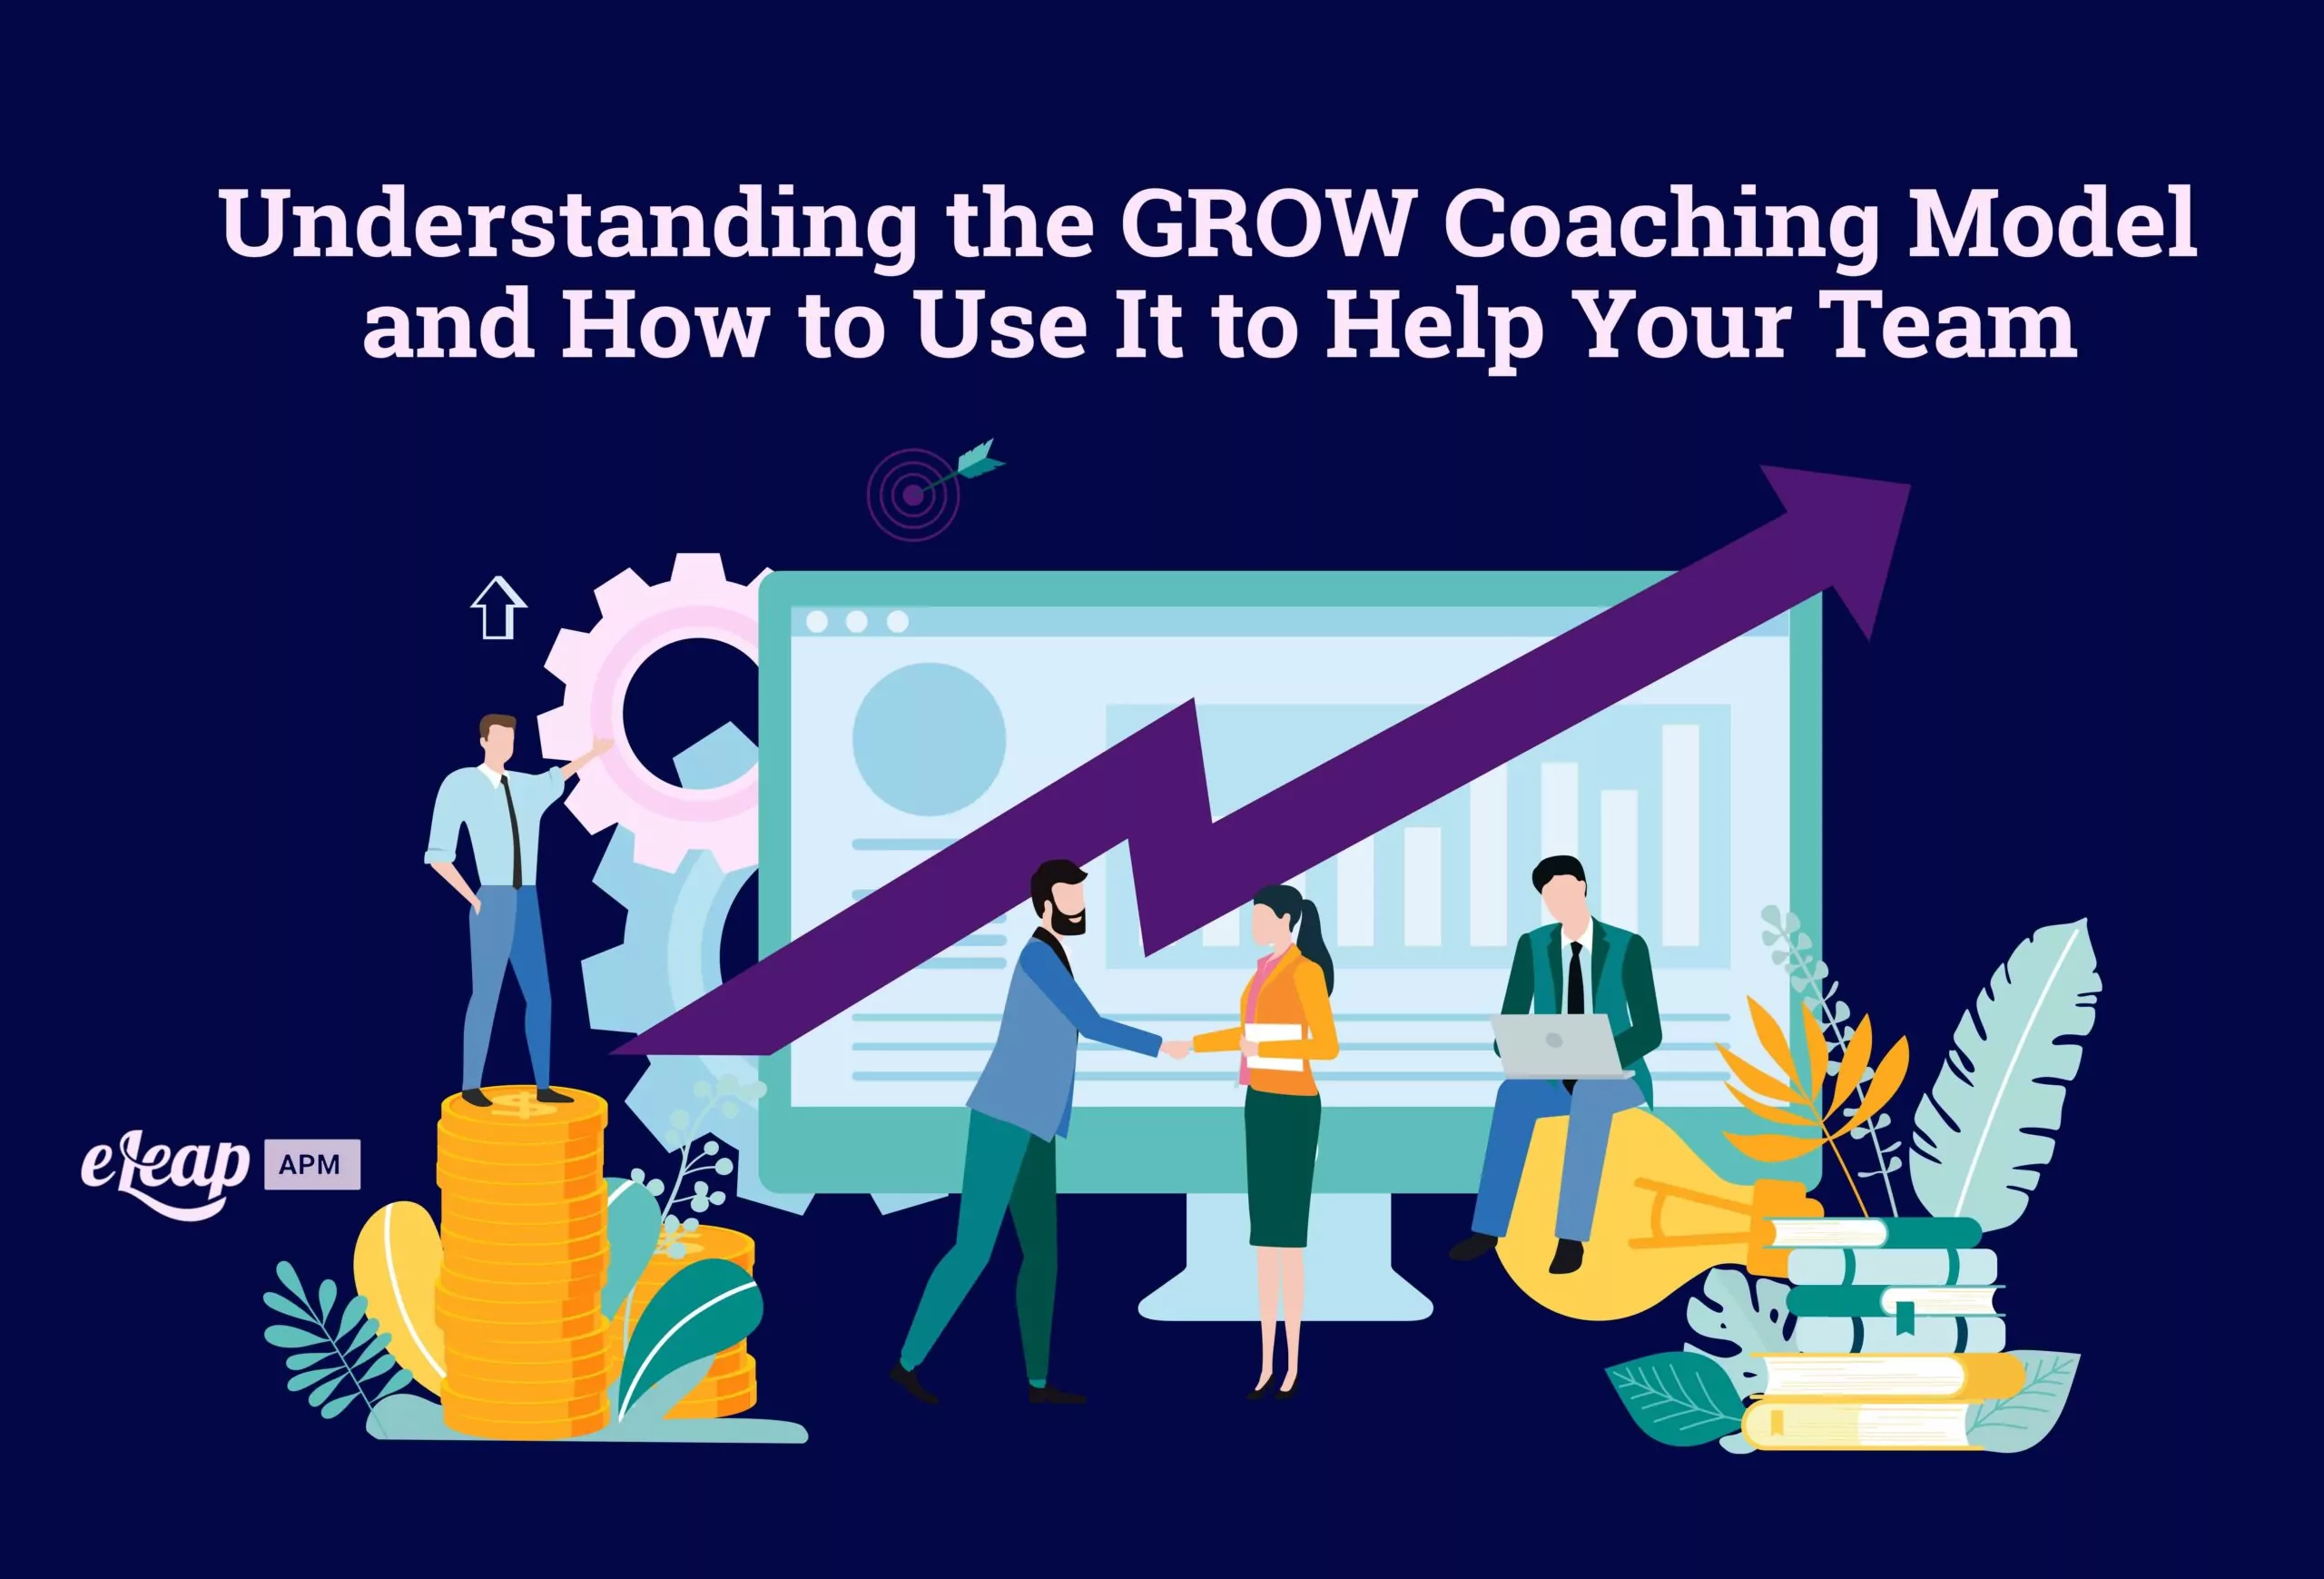 Understanding the GROW Coaching Model and How to Use It to Help Your Team